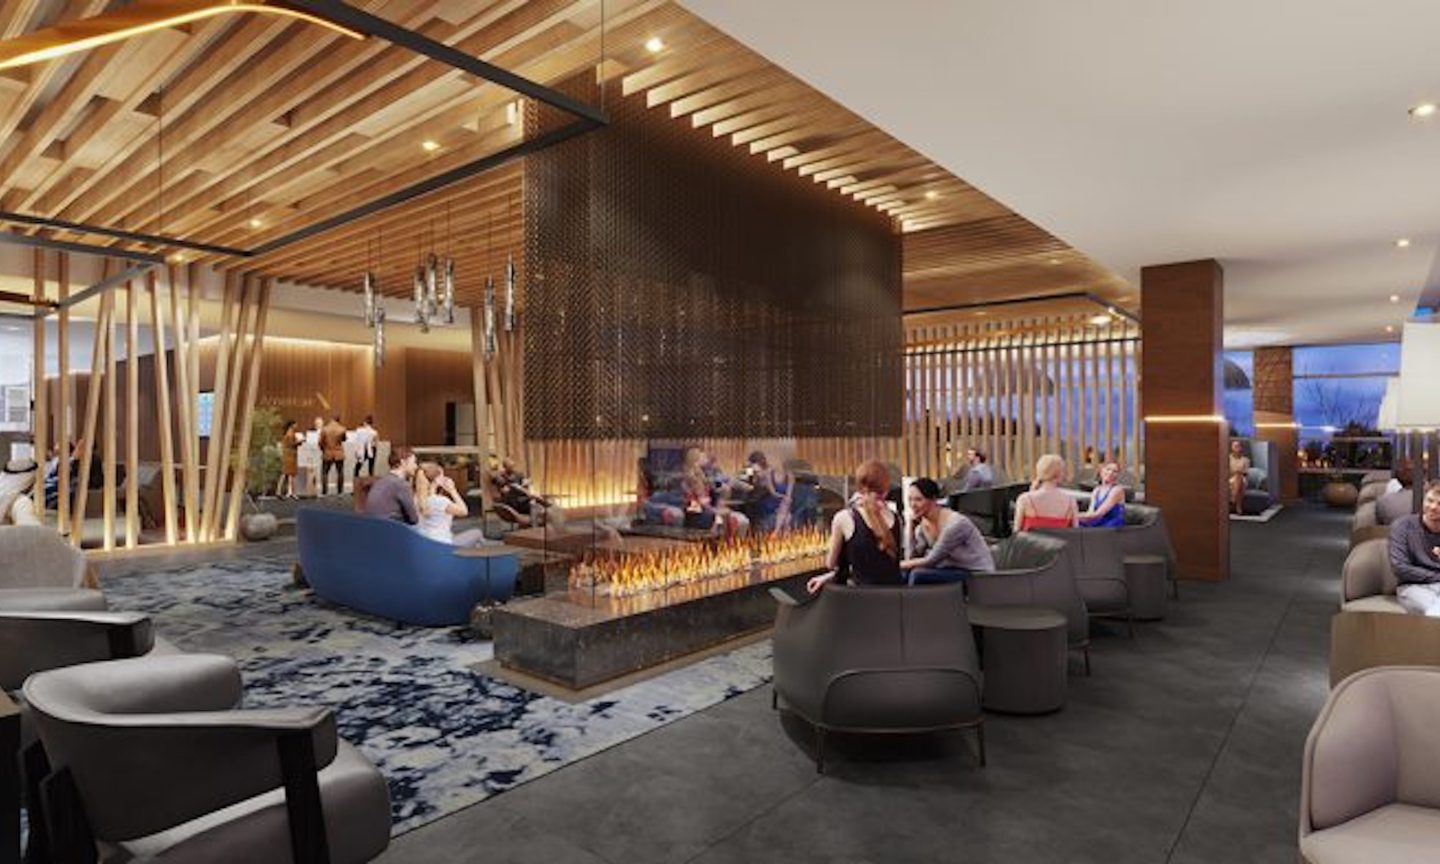 American Airlines ‘Dreamy’ New Lounge is Opening This Fall